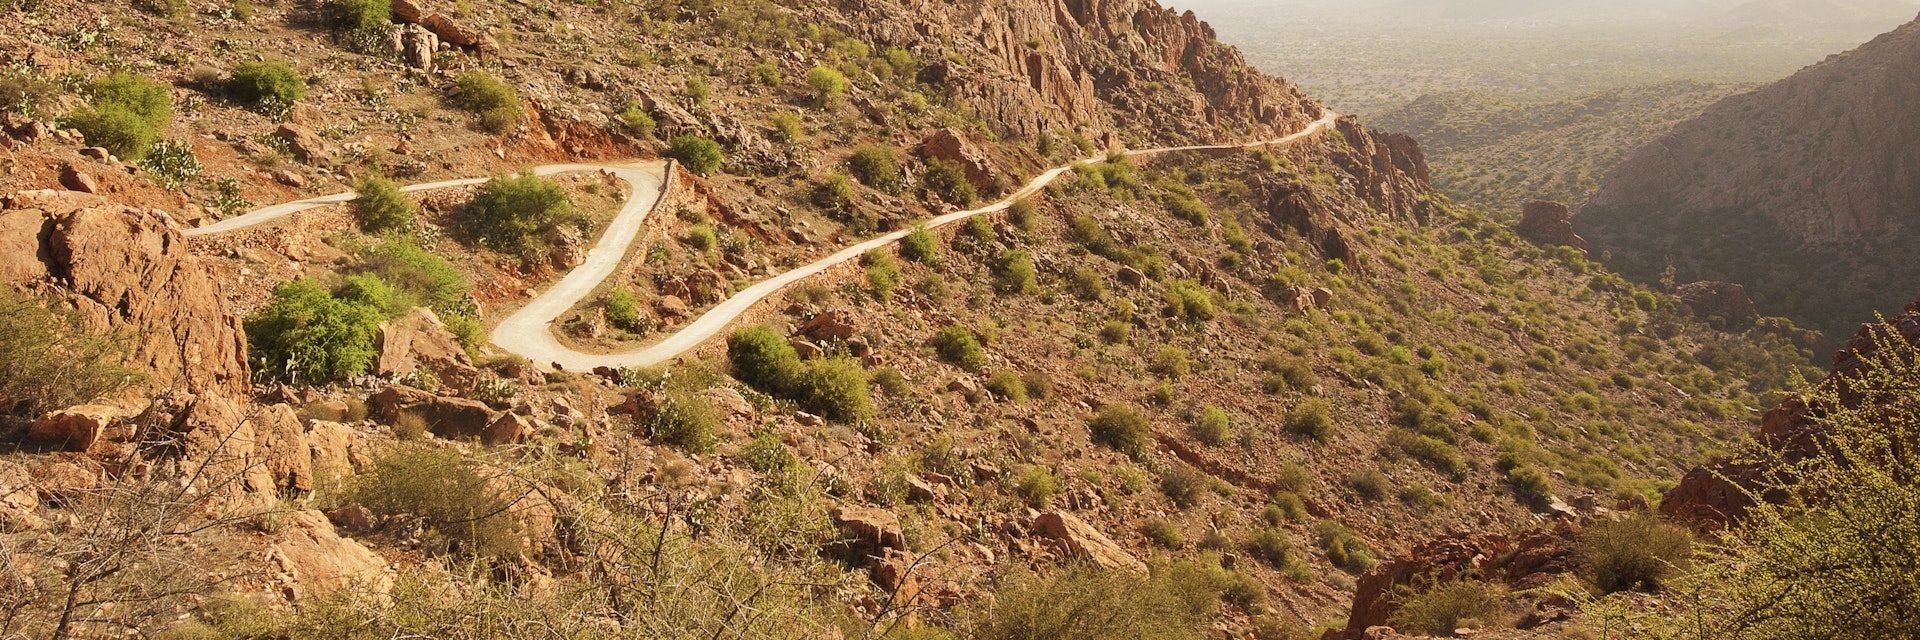 Winding trail through Anti Atlas mountains from Tafraout to Tagdicht.